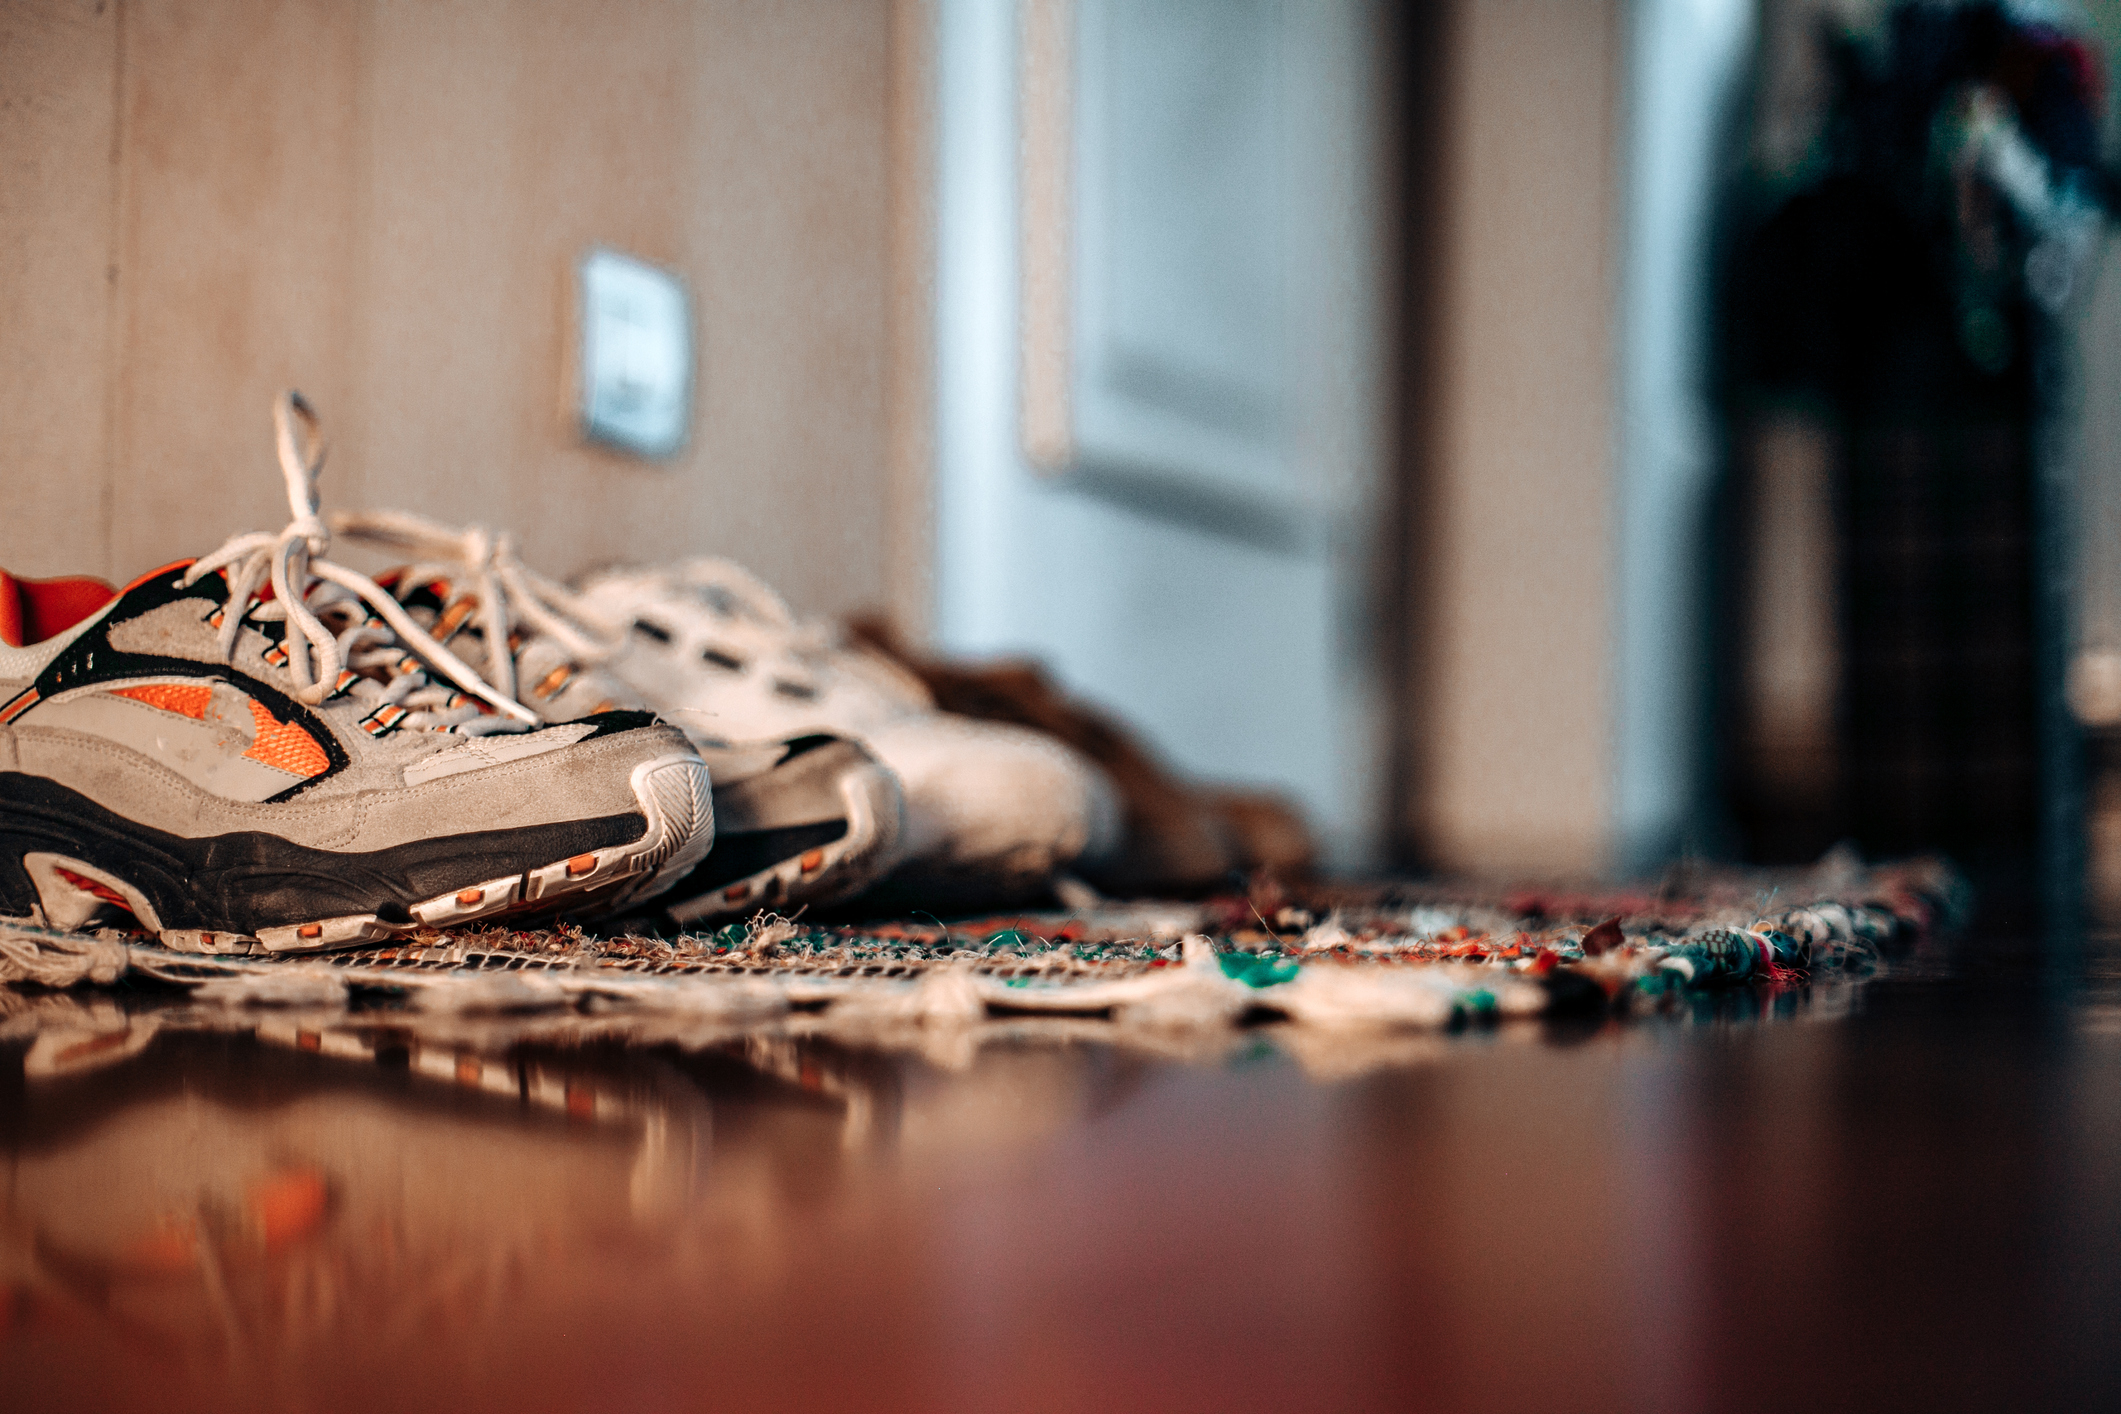 Shoes lined up on a rug